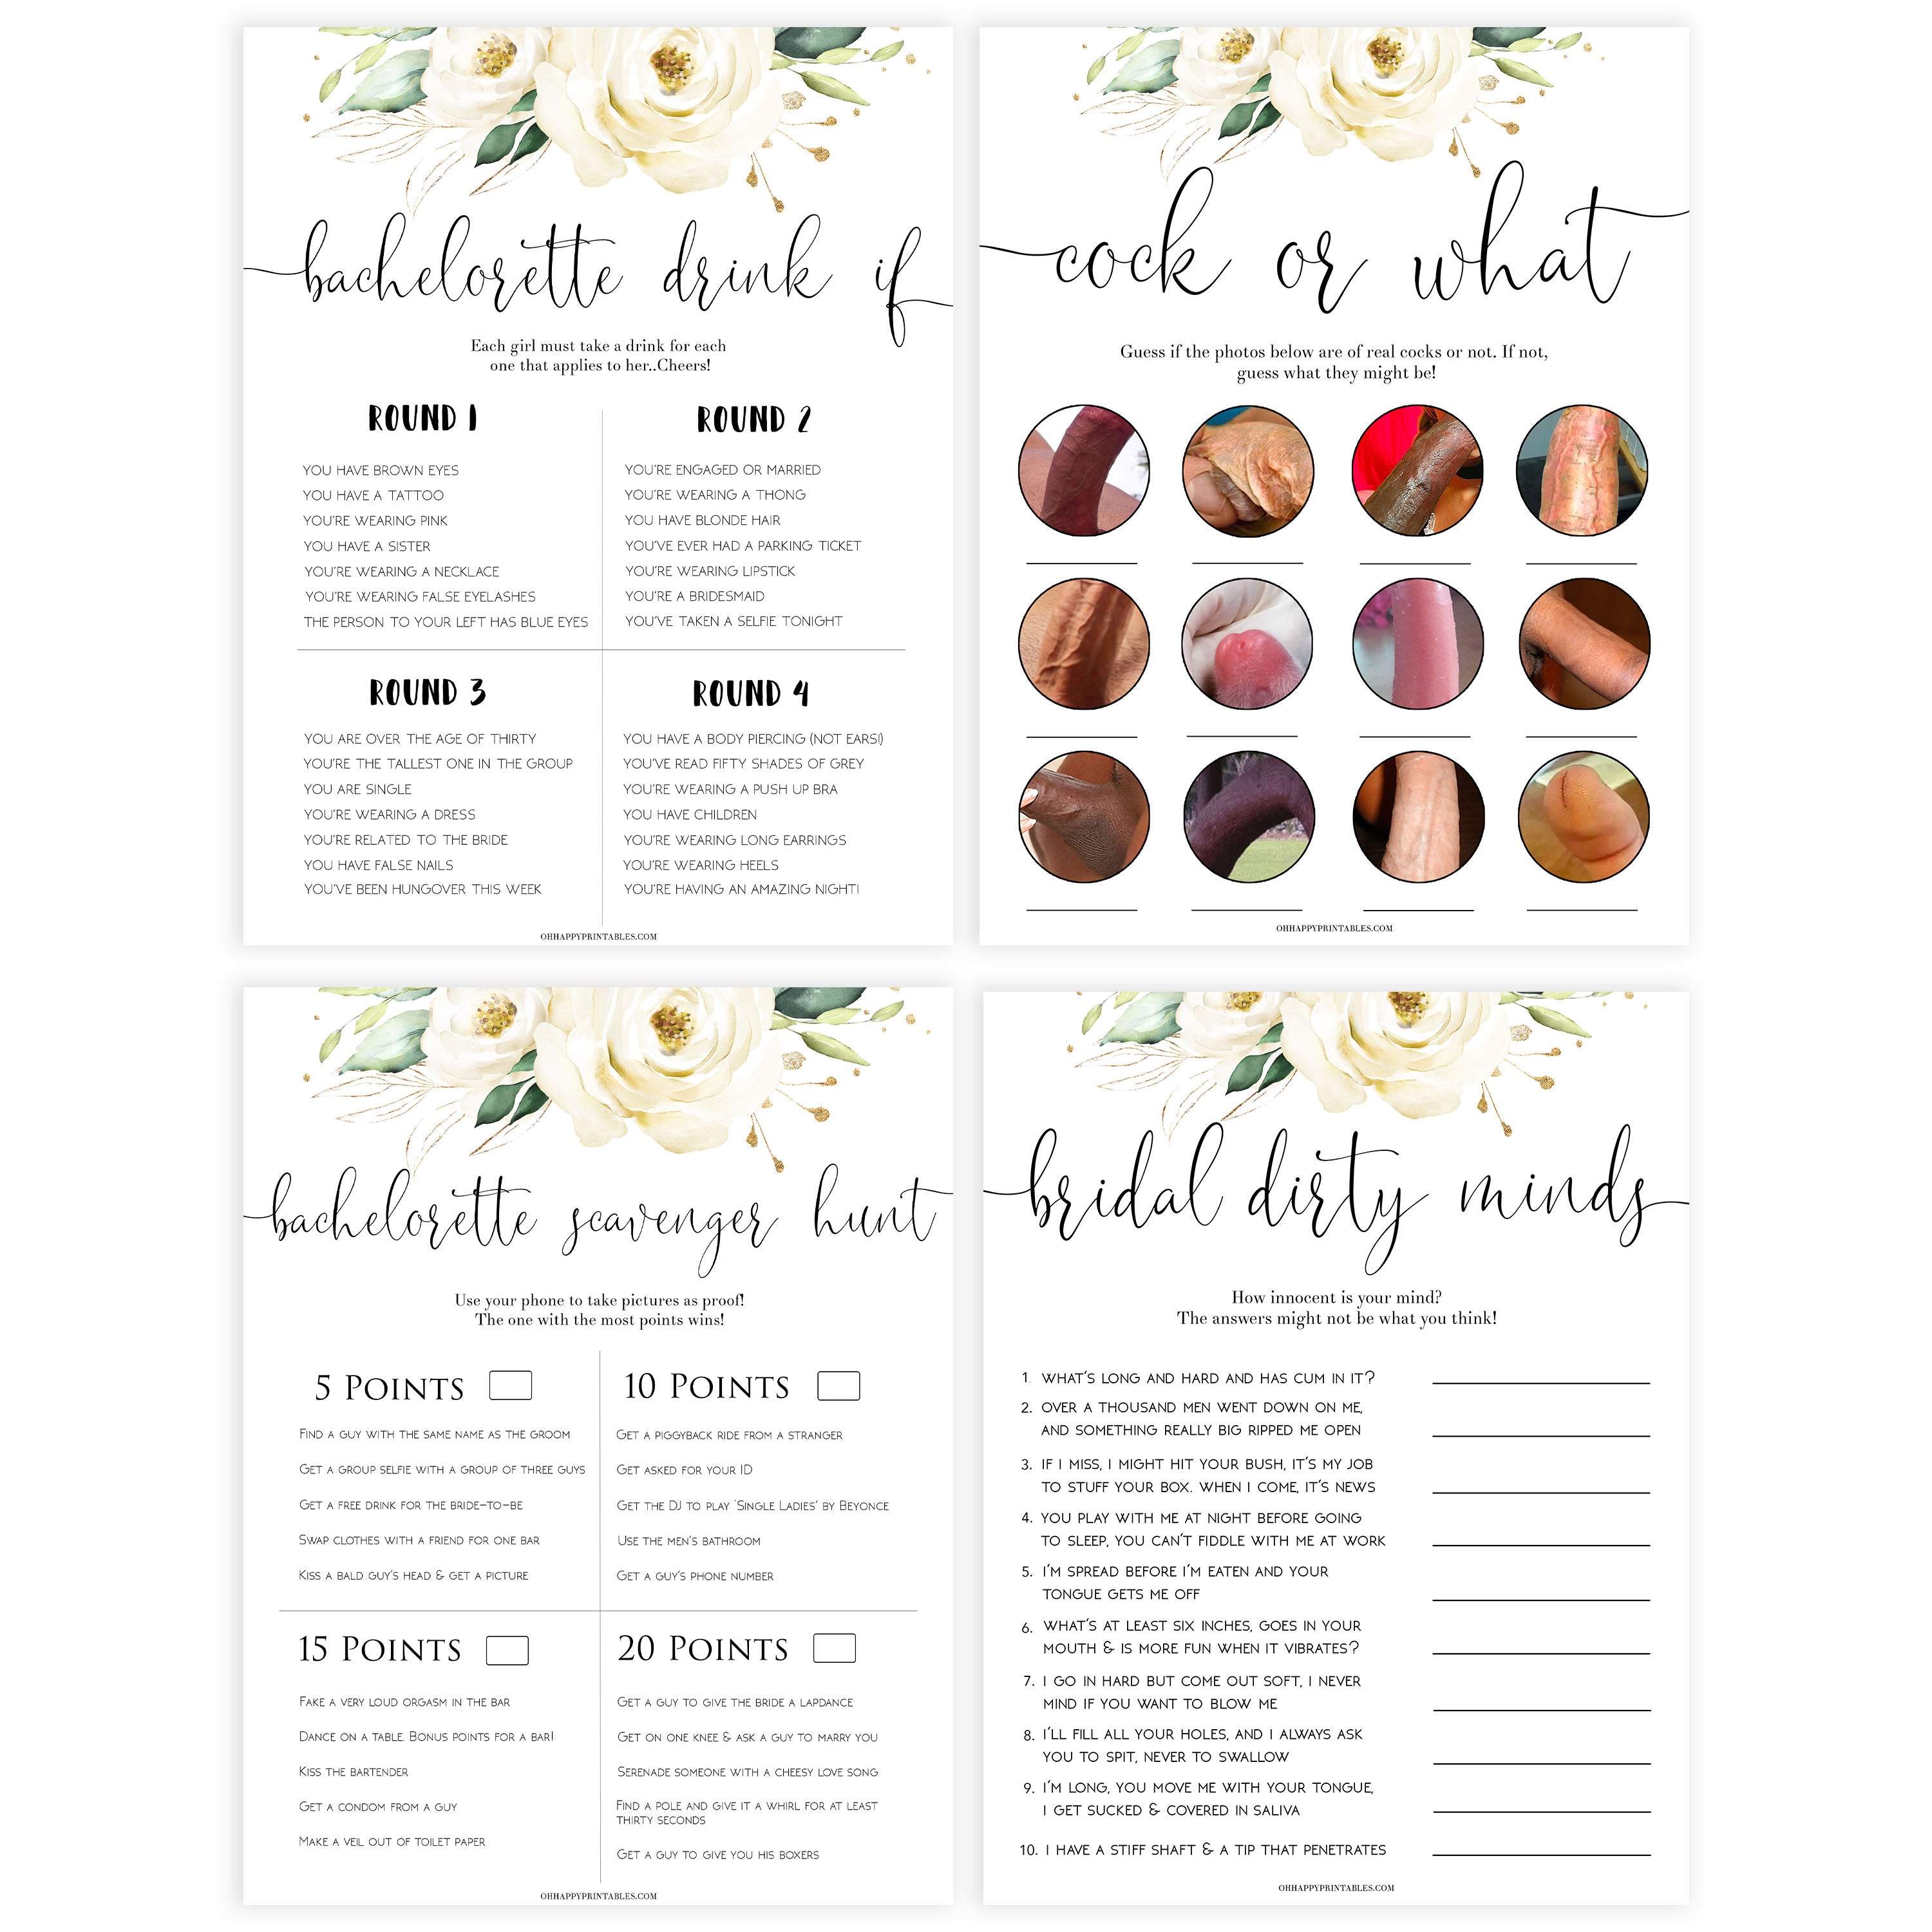 8 bachelorette games, Printable bachelorette games, floral bachelorette, floral hen party games, fun hen party games, bachelorette game ideas, floral adult party games, naughty hen games, naughty bachelorette games, cock or what, would she rather